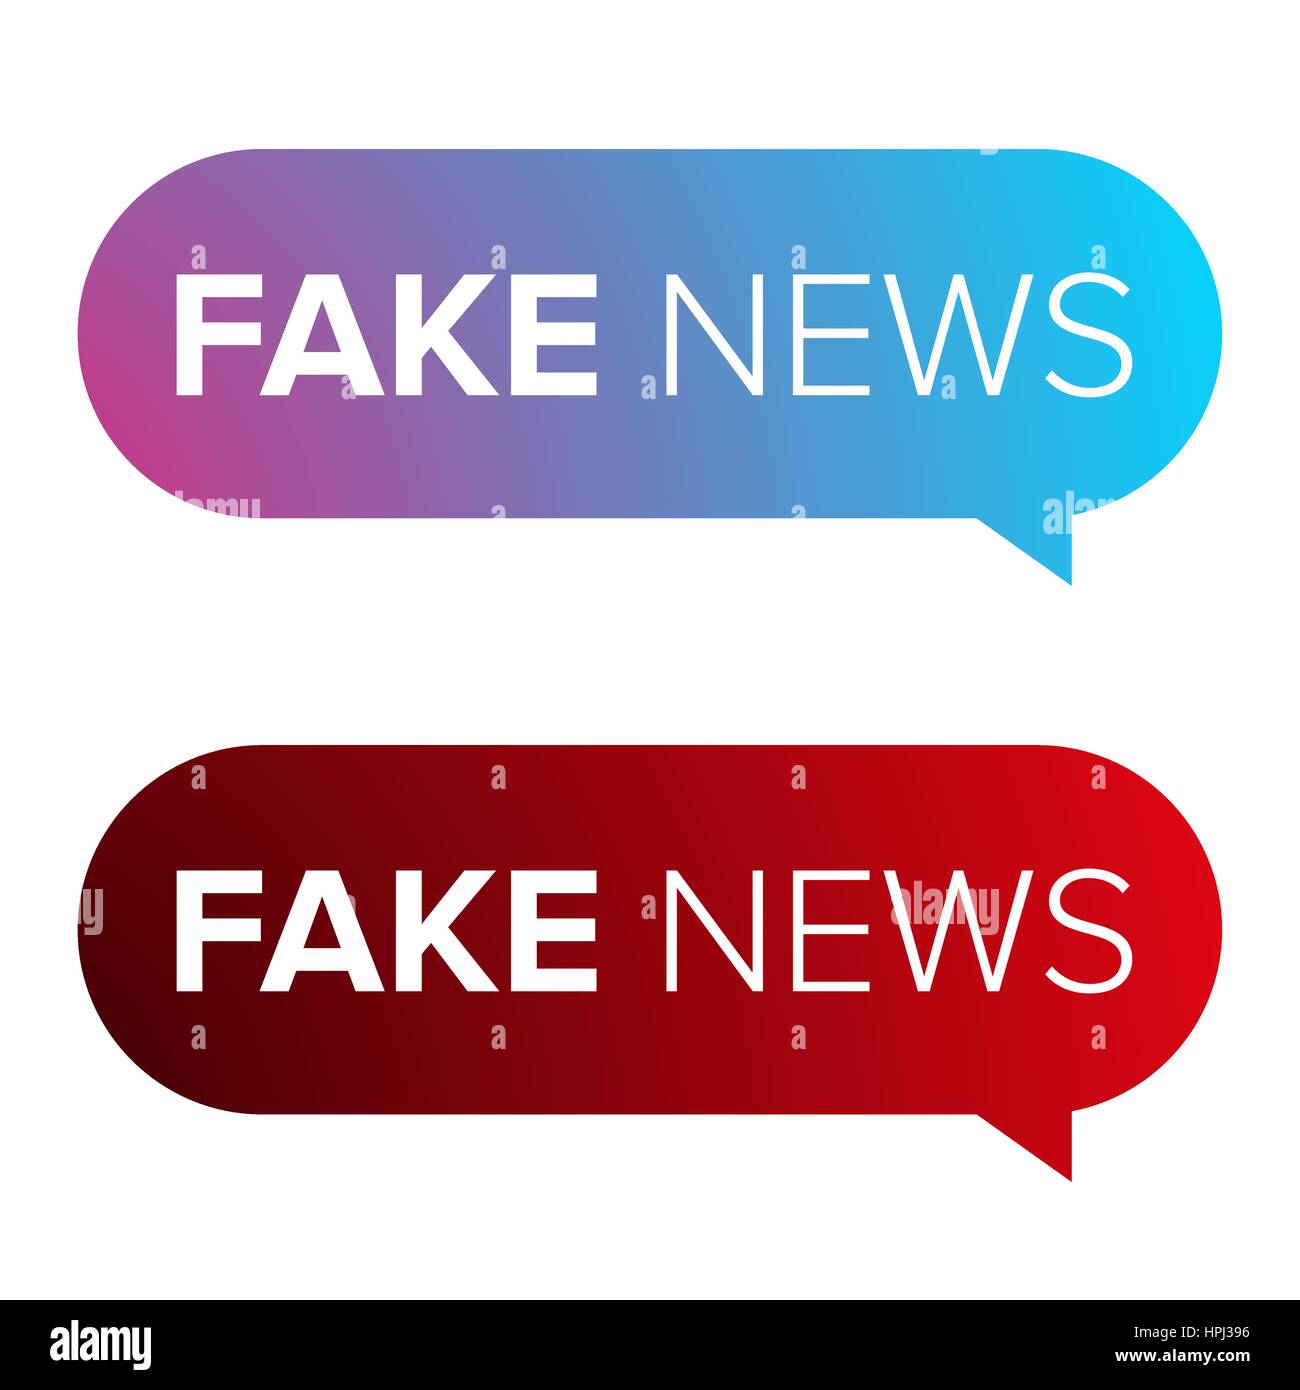 Fake news icon Stock Vector Images - Alamy